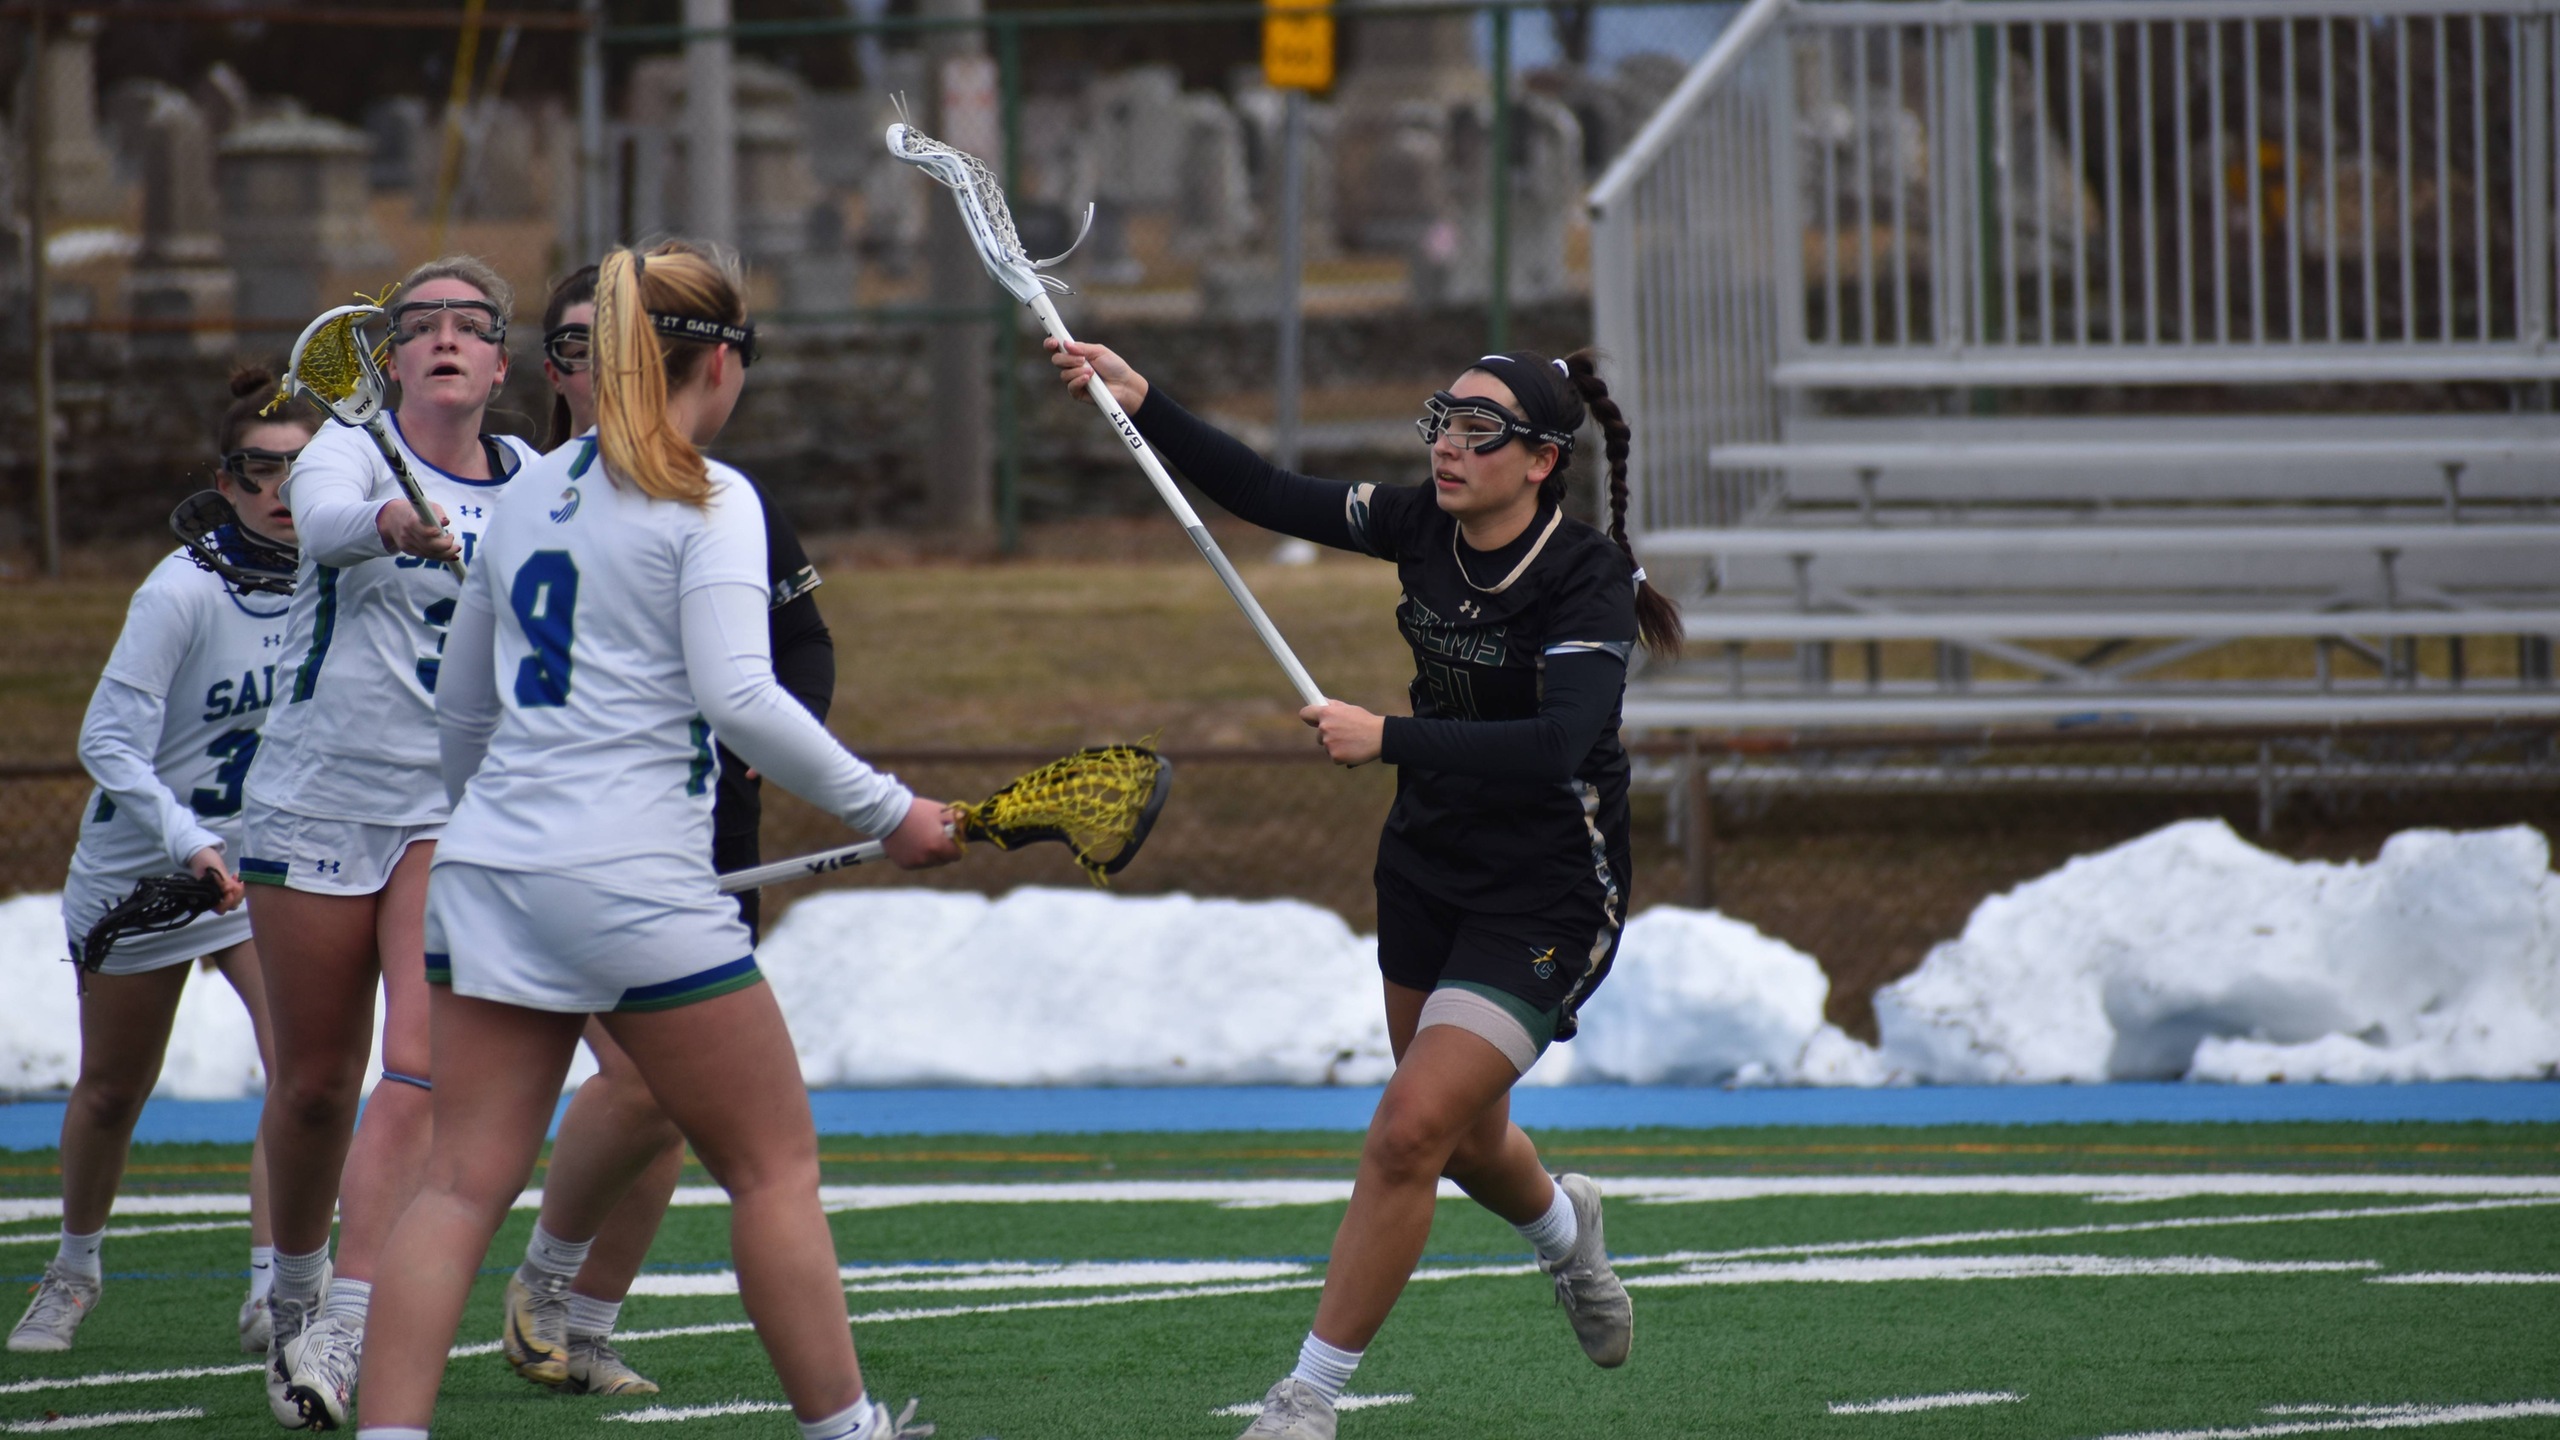 Women's Lacrosse Lose a Tough Divisional Game to the Blue Jays